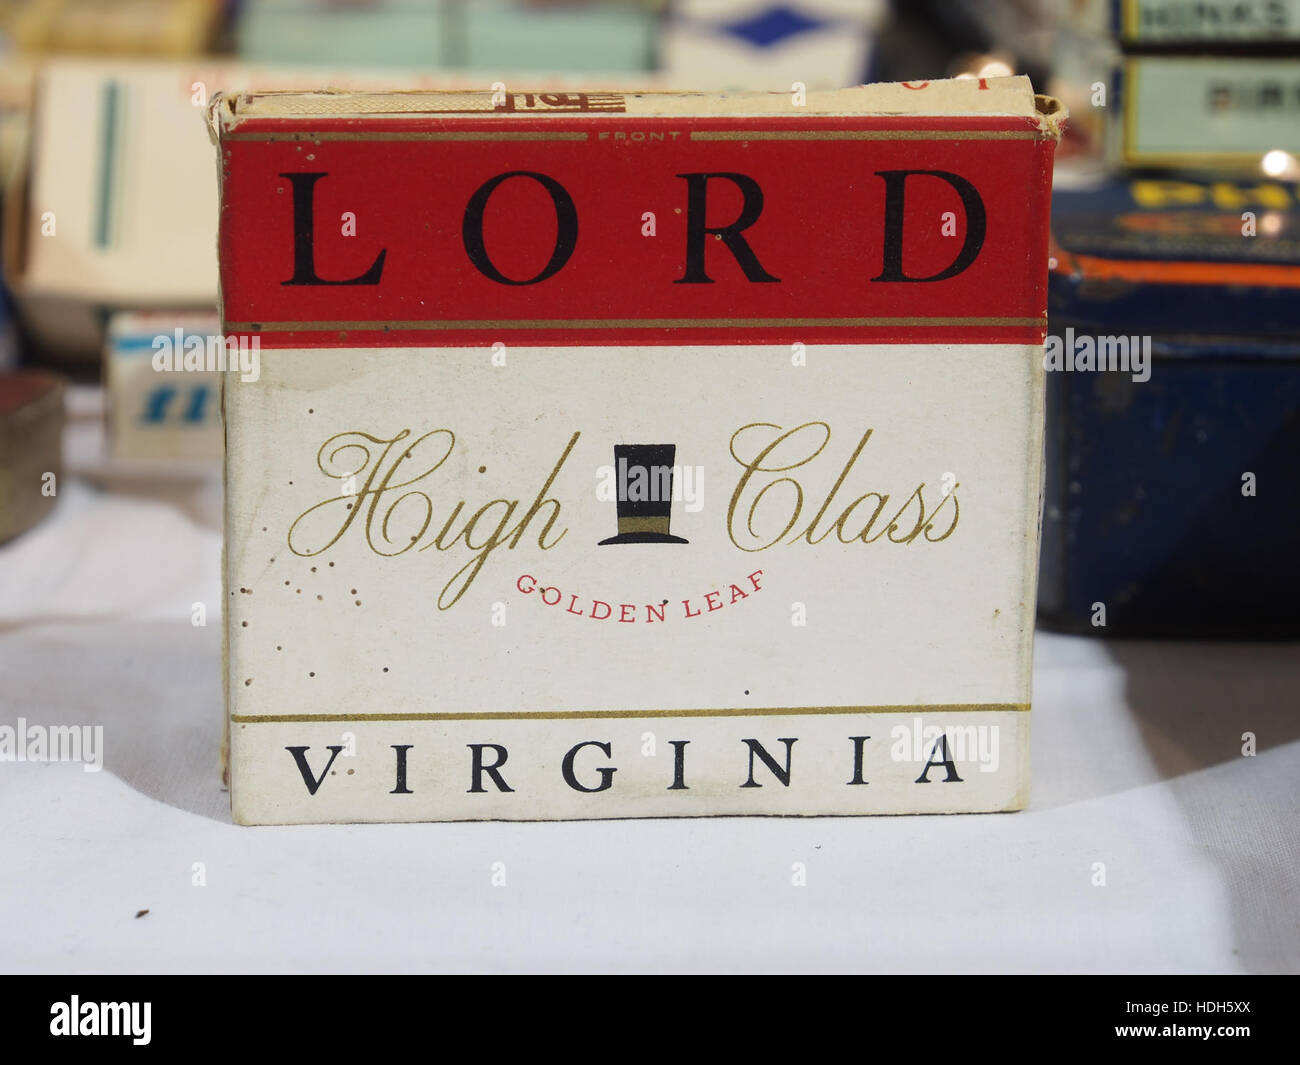 Lord cigarettes pack pic1 Stock Photo